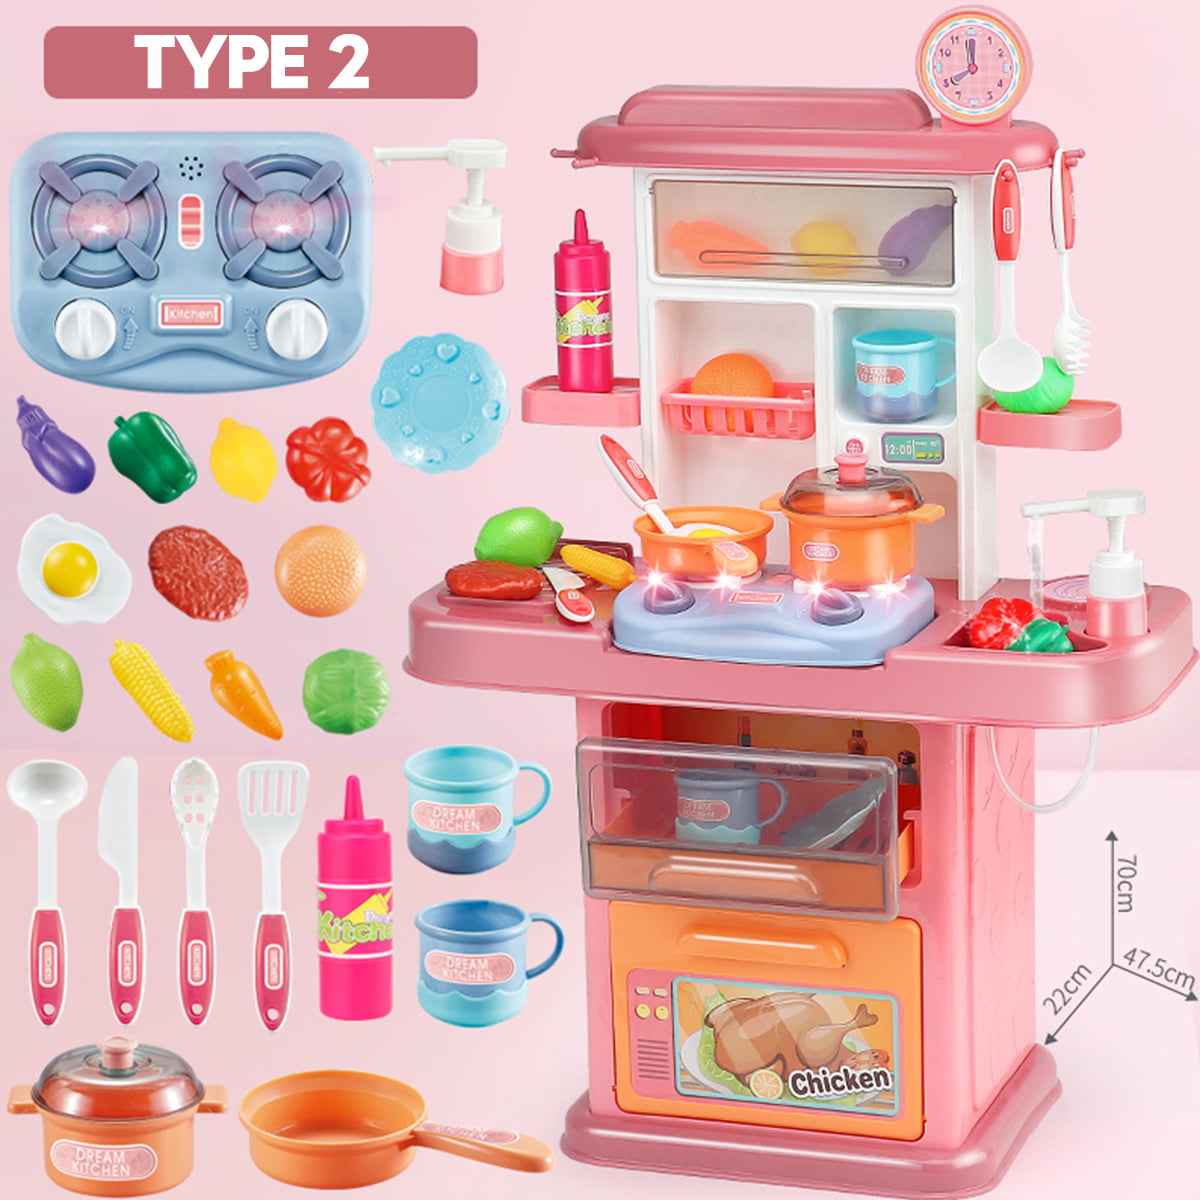 Compact size Kids toy Play Kitchen with 30 Piece Accessory Complete Play Set 